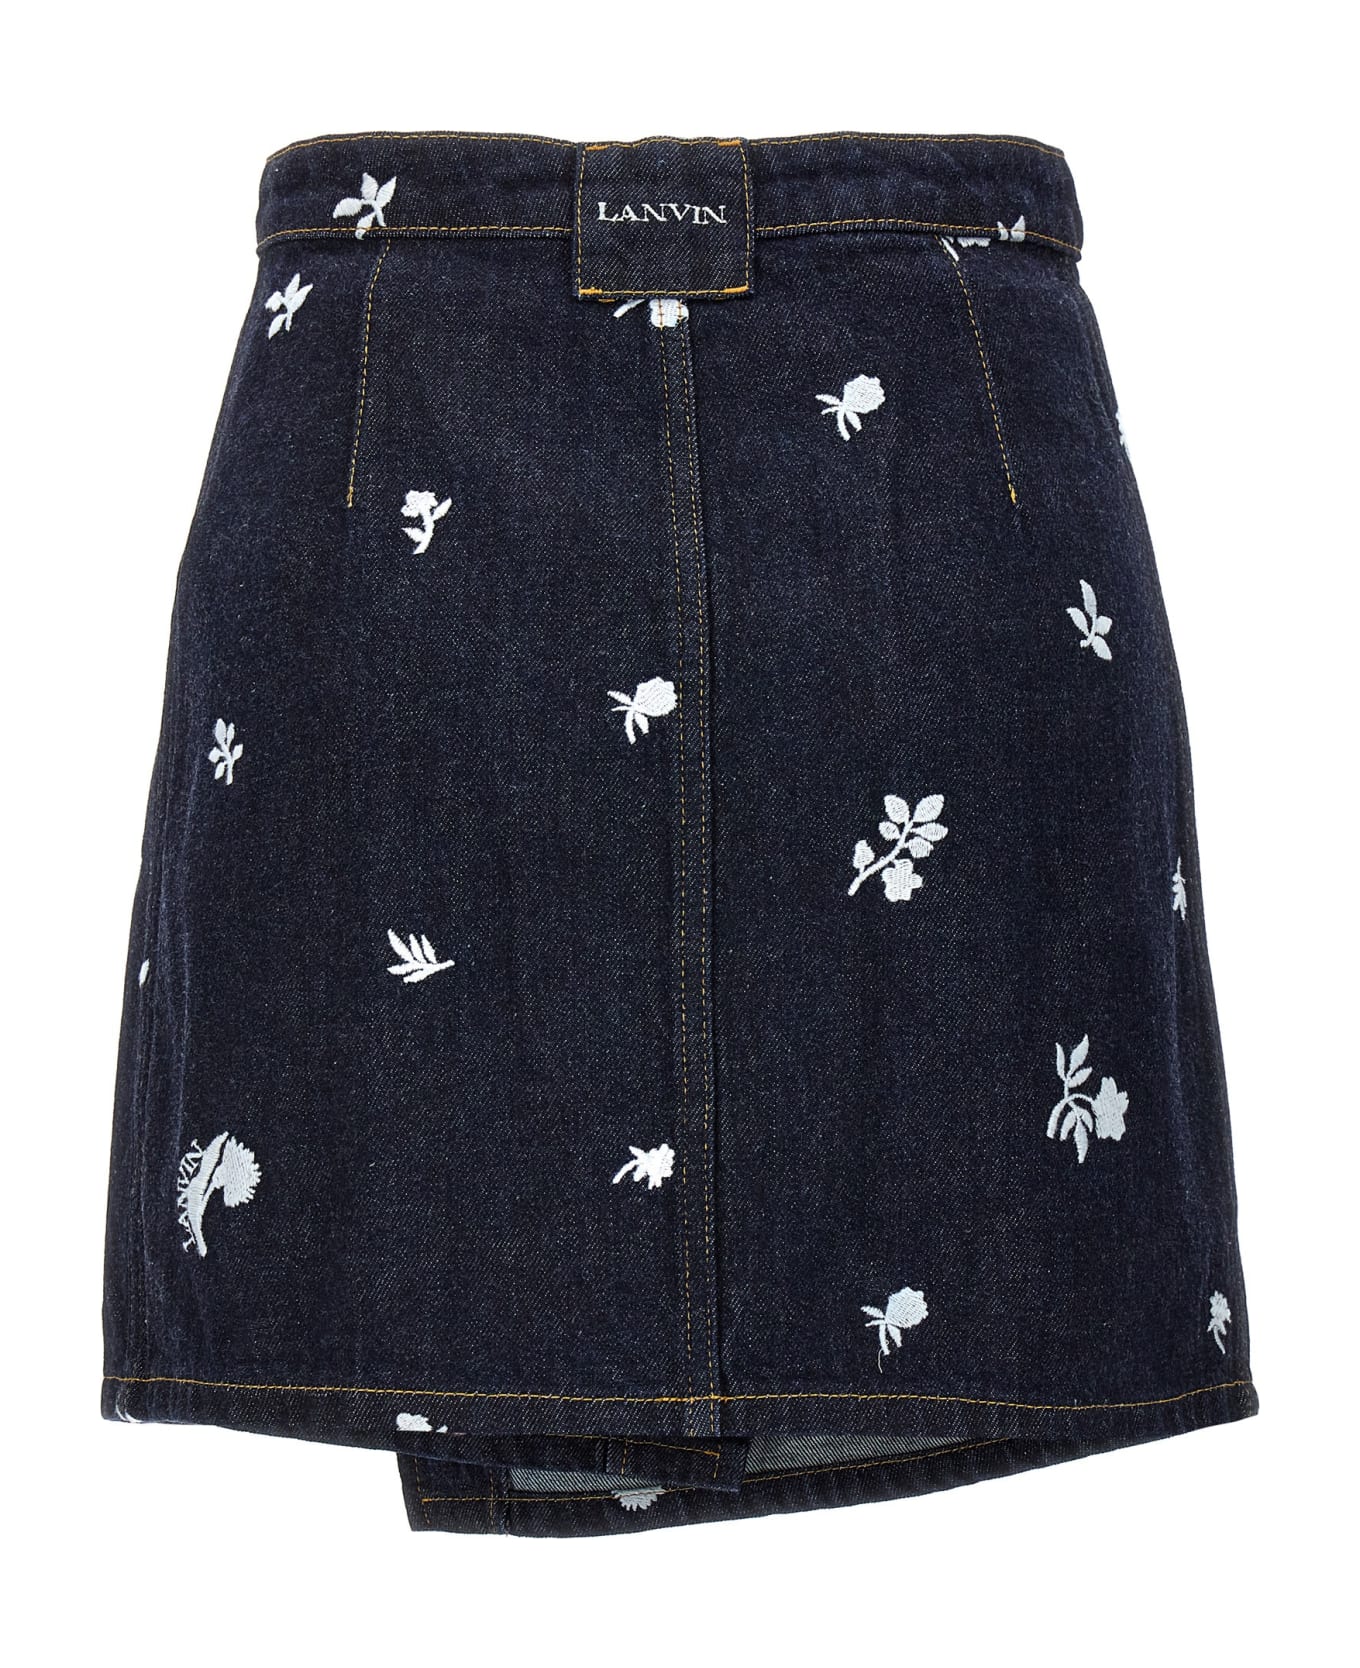 Lanvin All-over Embroidery Skirt - Blue スカート